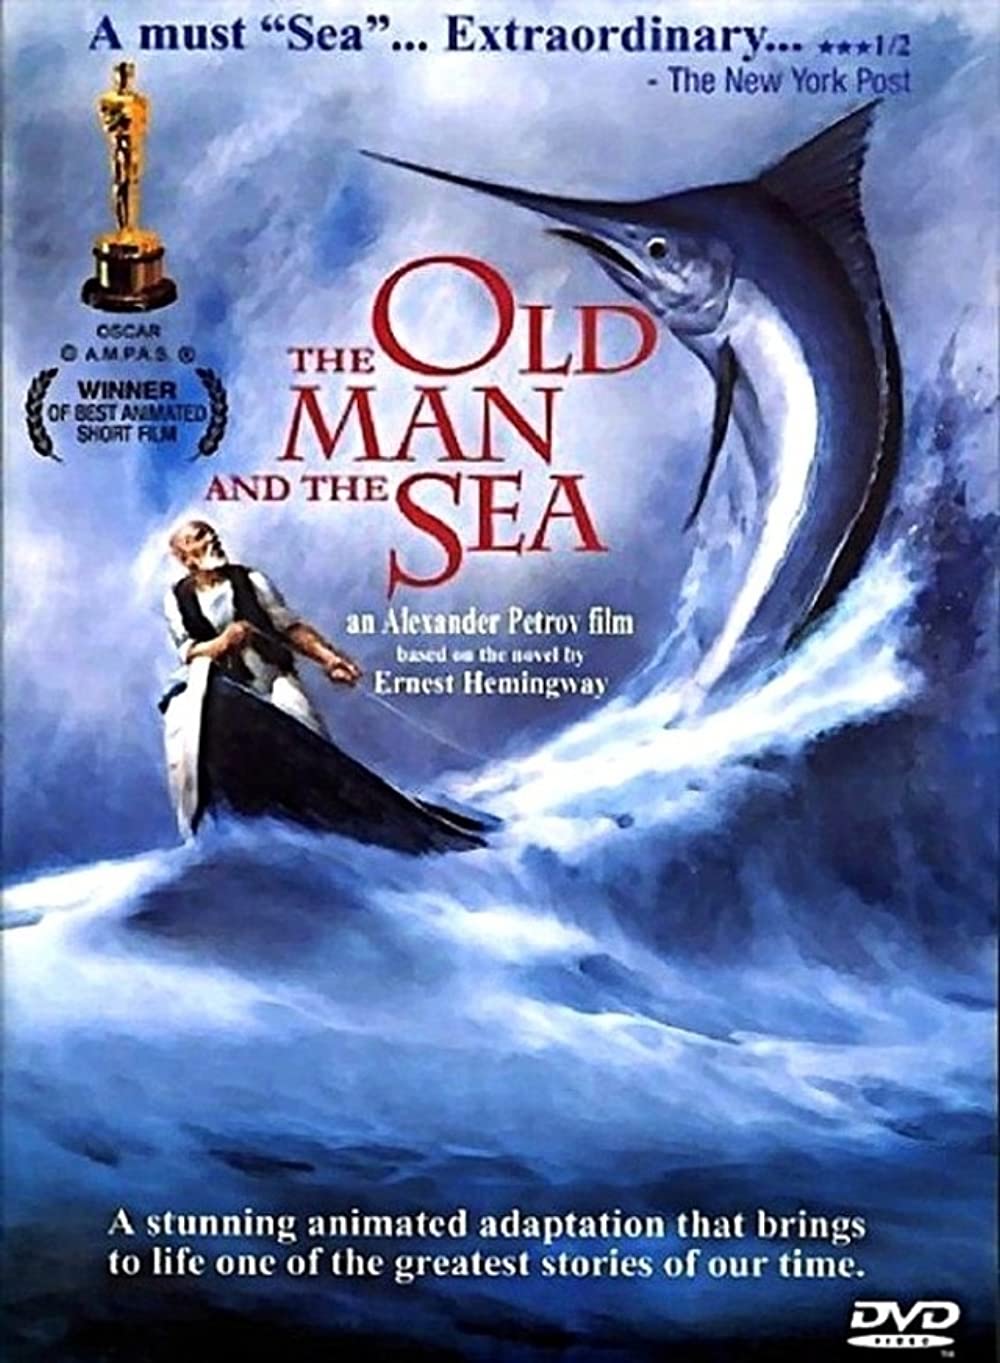 The Old Man and the Sea (Short 1999)